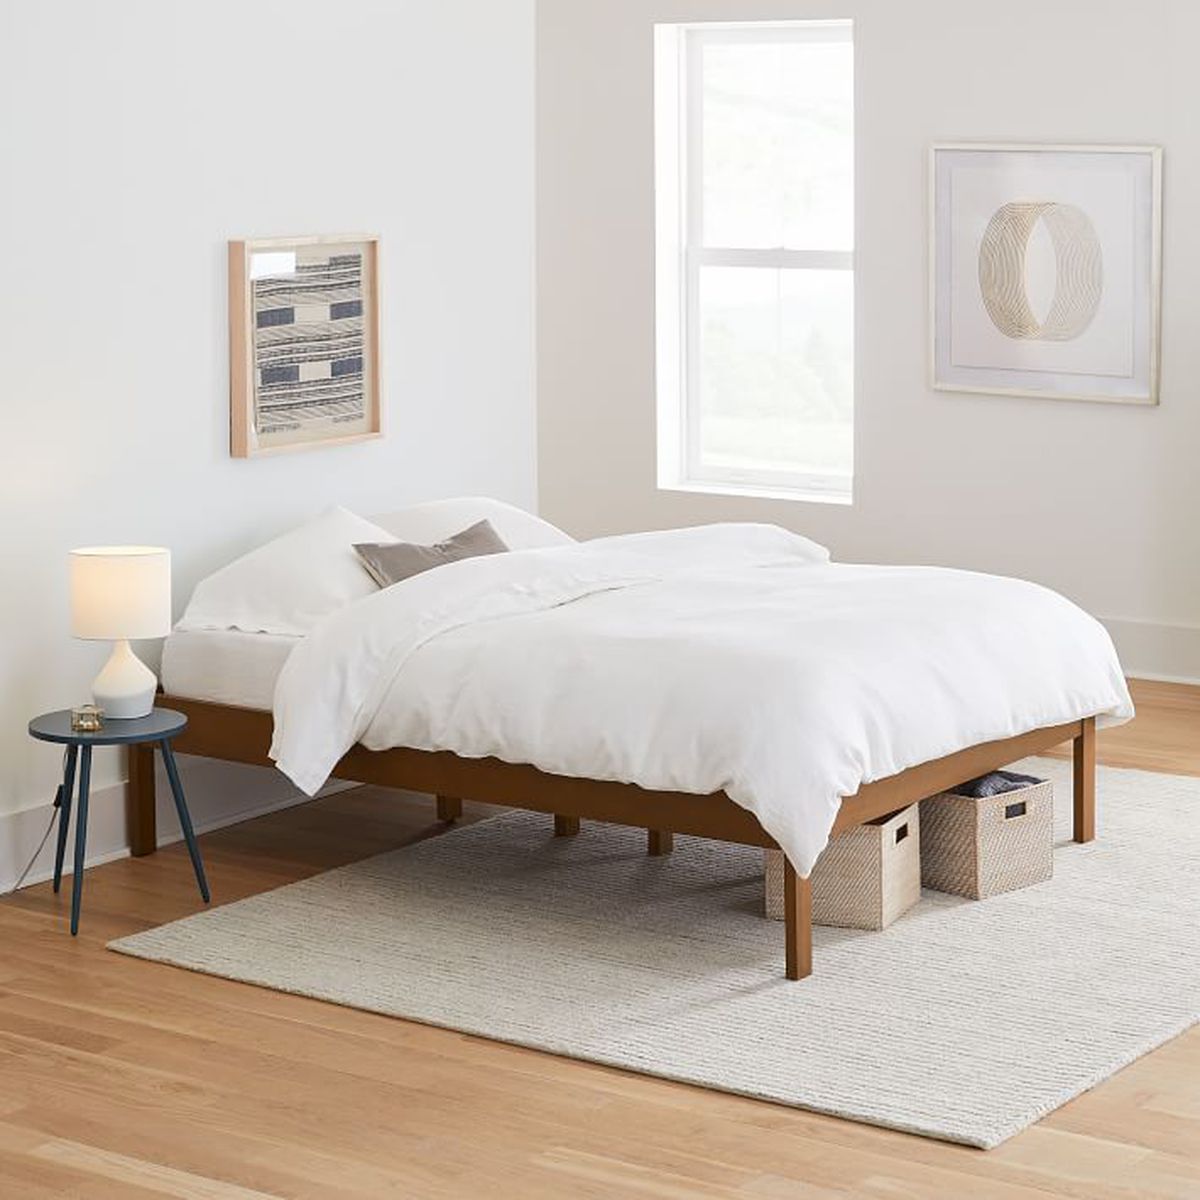 A simple, wooden bedframe with four legs. 